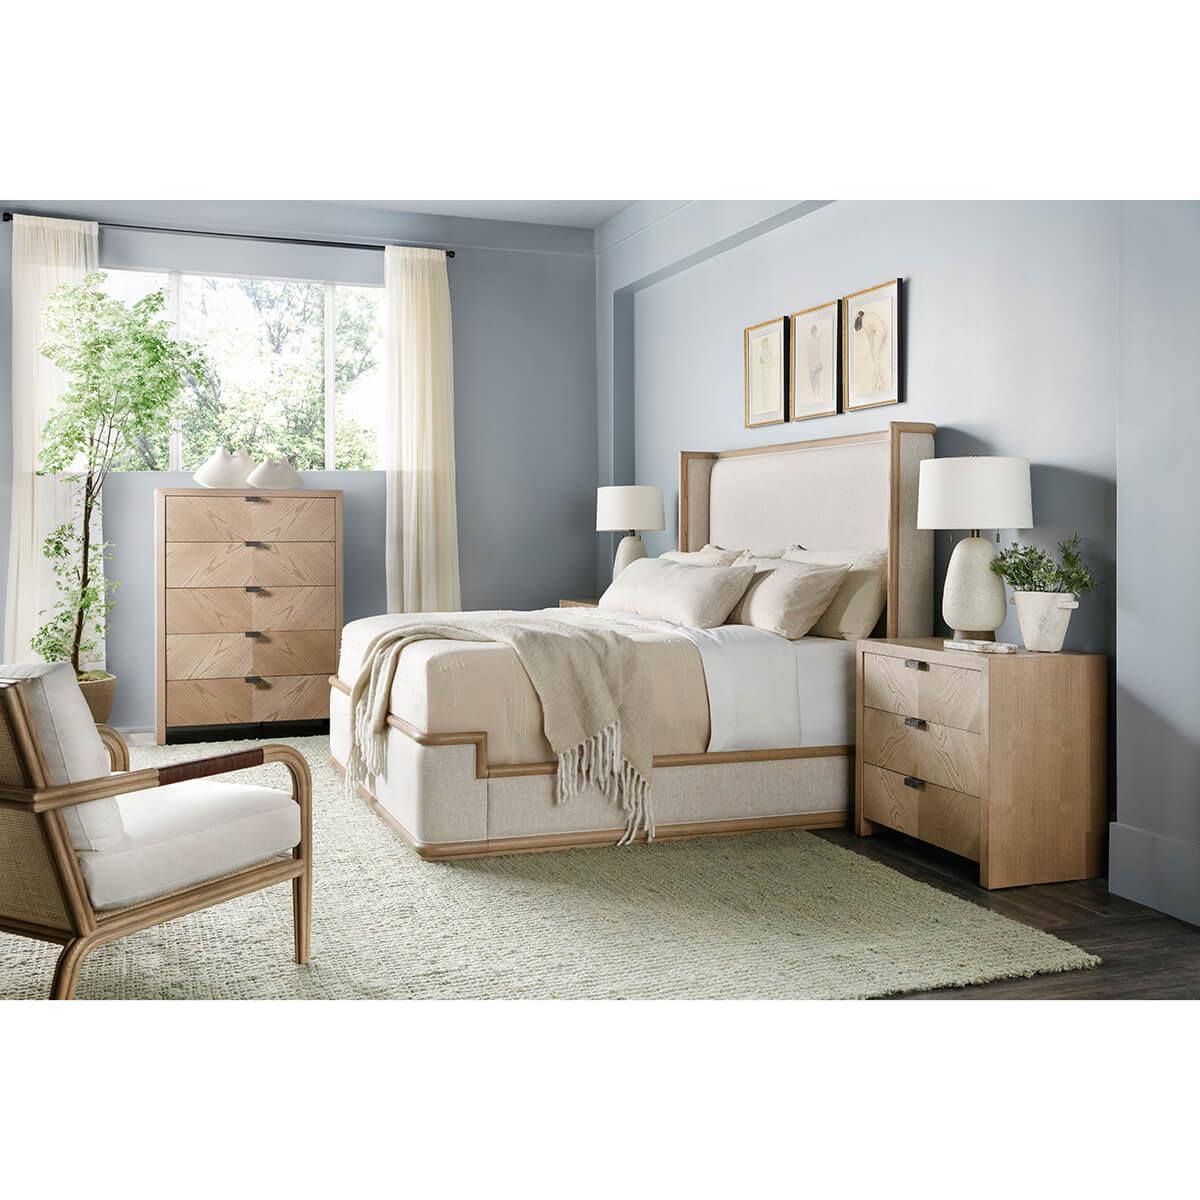 Modern Framed and Upholstered Bed - US King size bed, with a smooth straight grain exposed oak frame trim in our light oak dune finish. With a high back padded upholstered headboard, upholstered rails and foot board.
Dimensions: 81.75